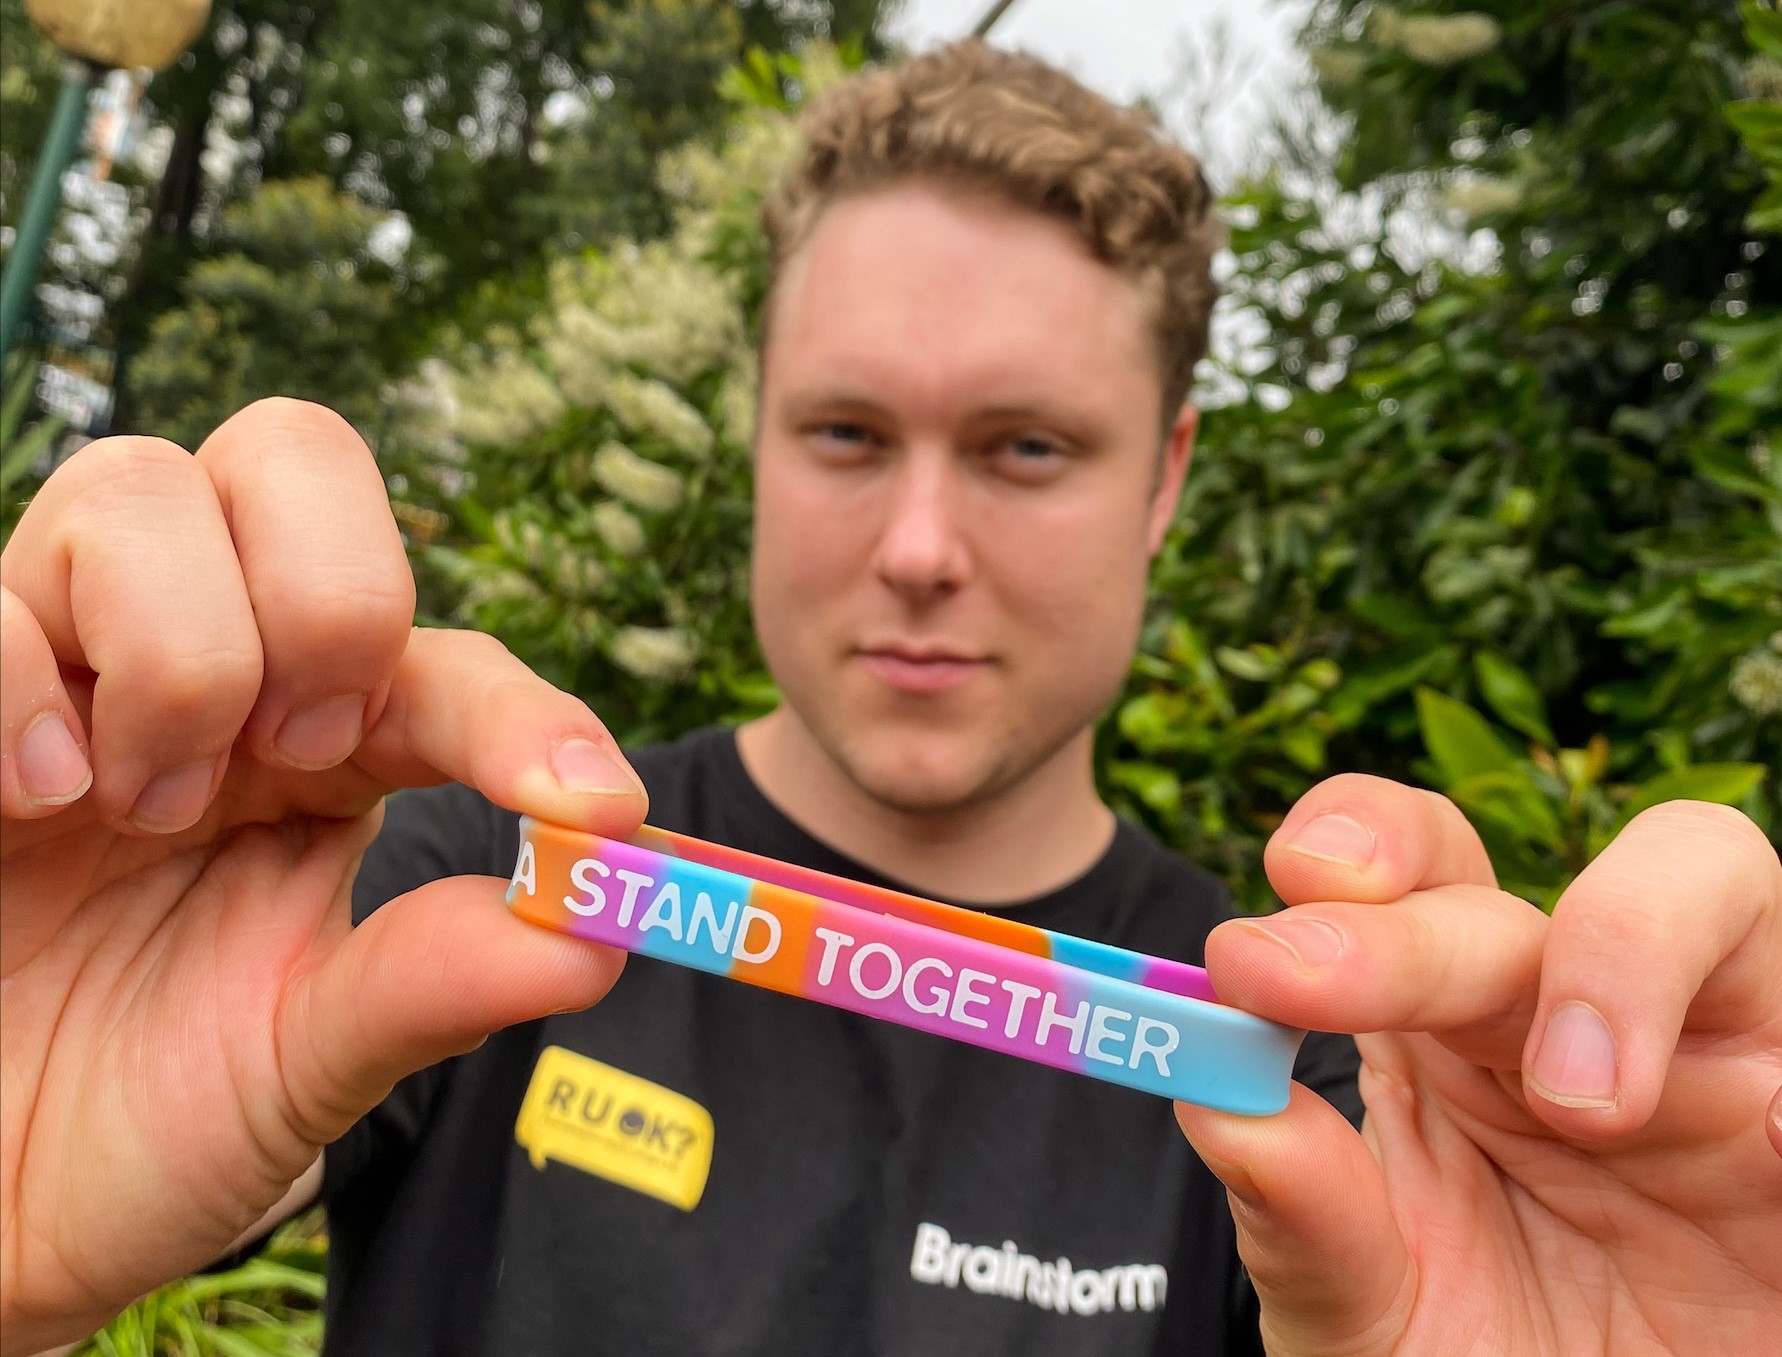 Blake holds a National Day of Action wristband